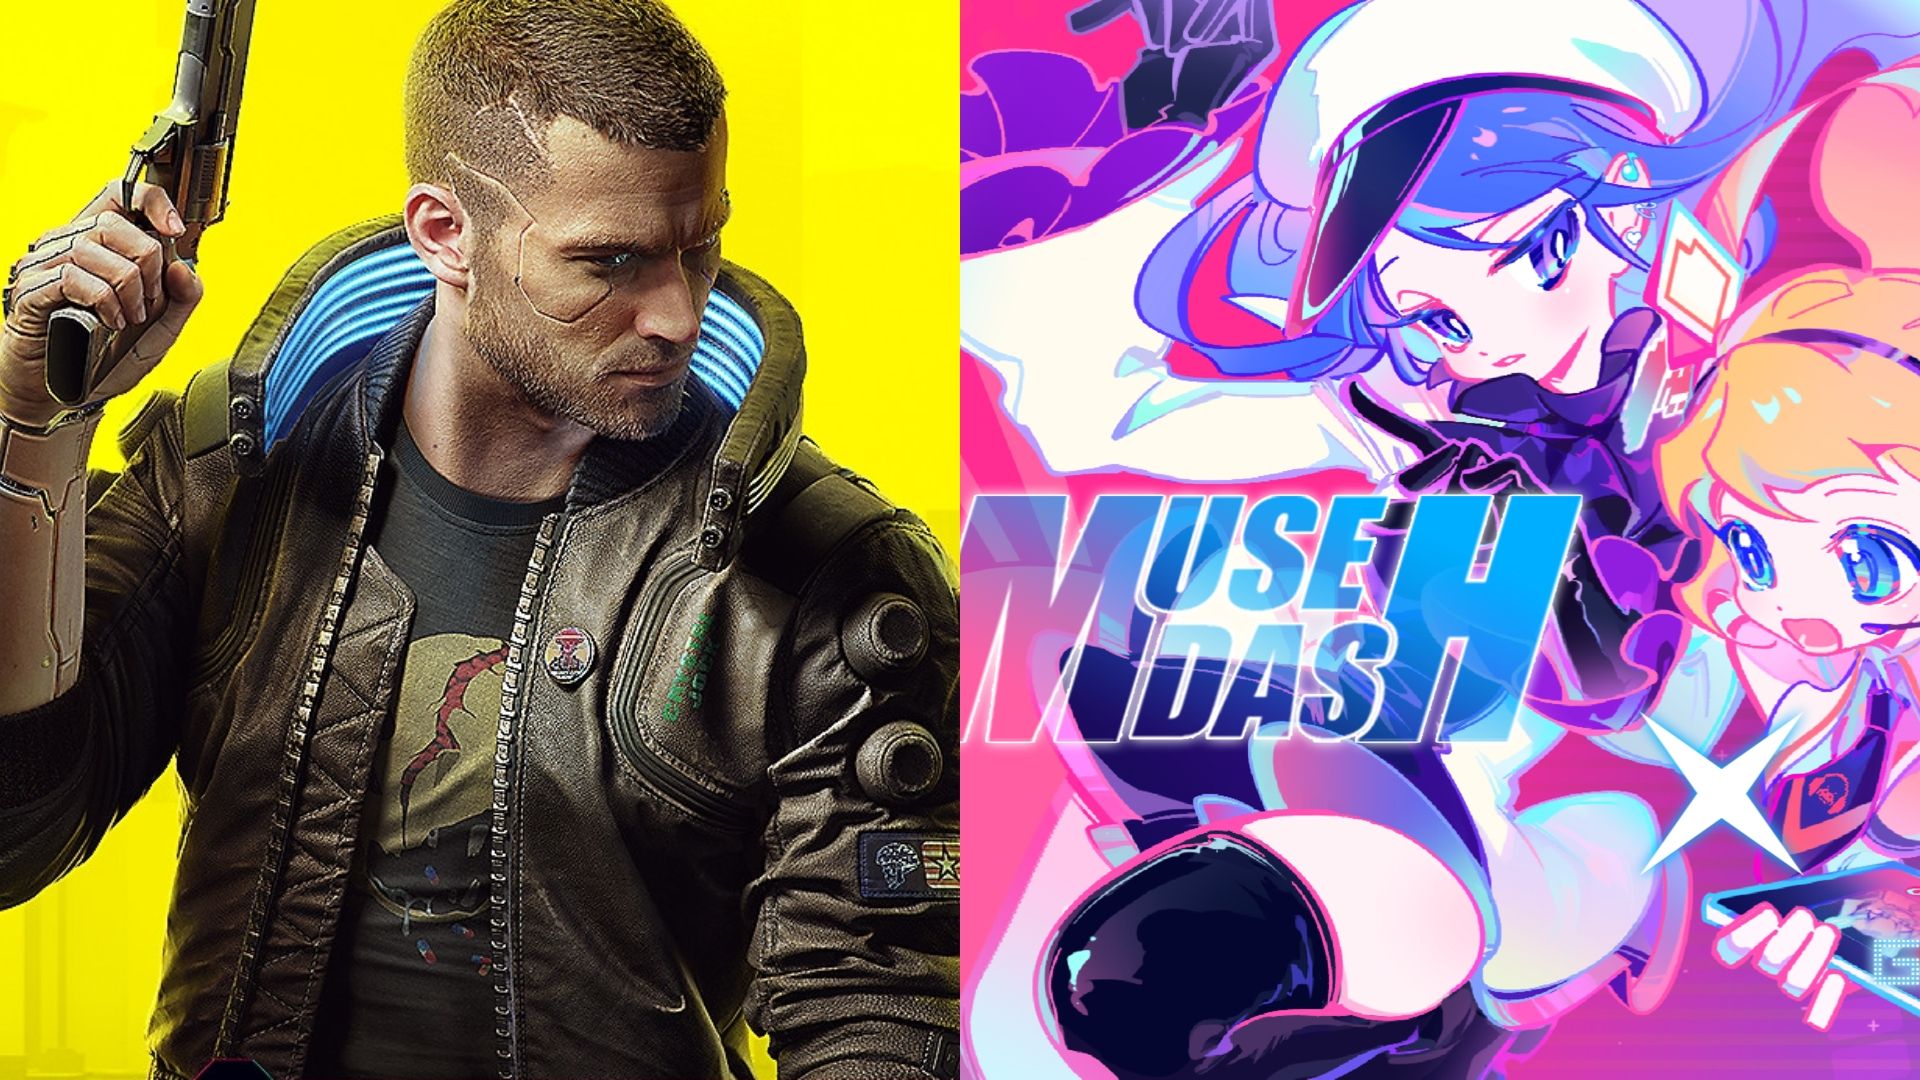 Cyberpunk 2077 Muse Dash PeroPeroGames Day Off Story feature